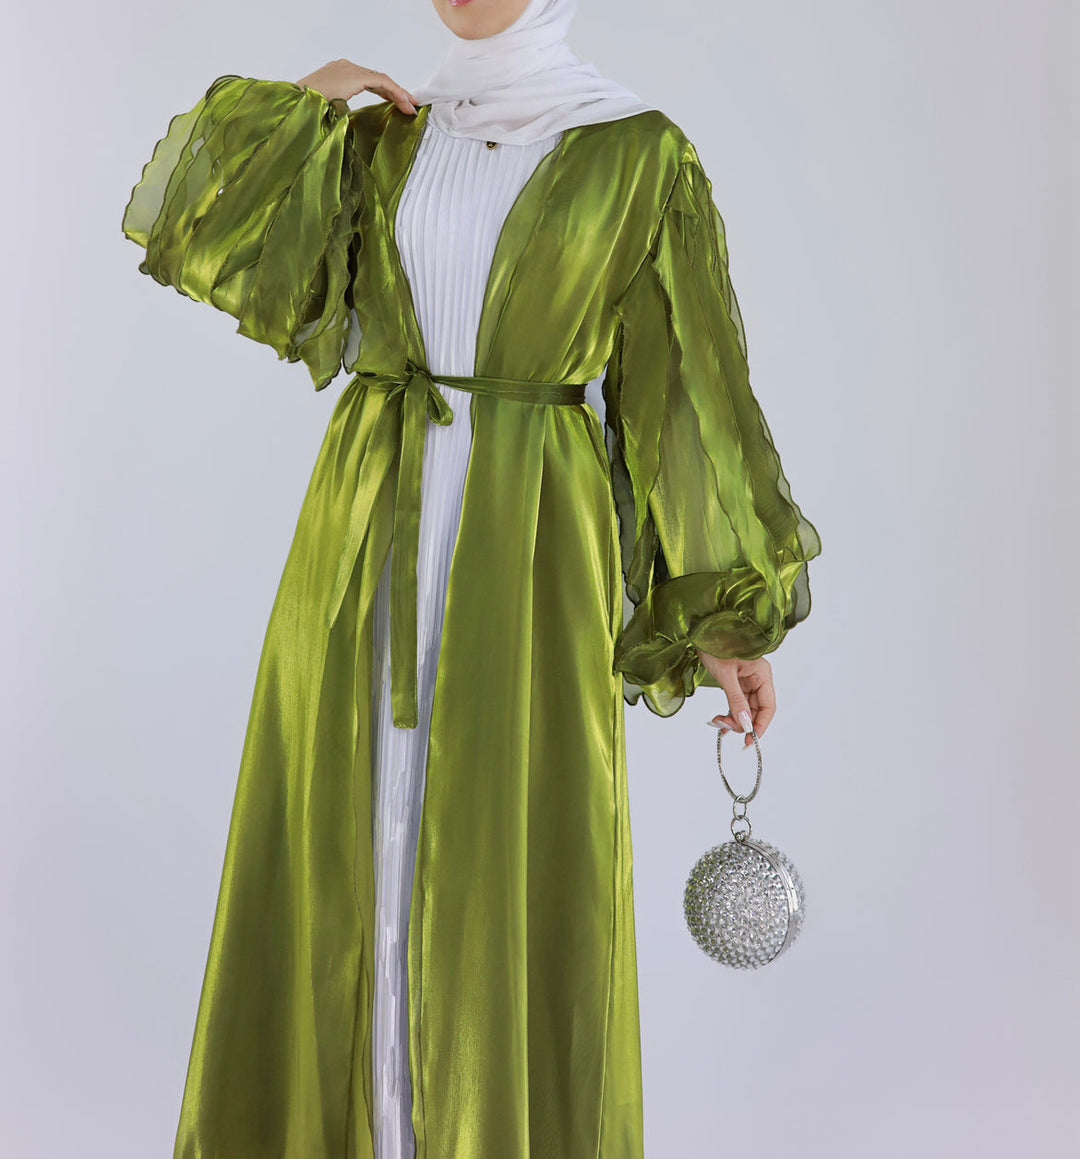 Get trendy with Bella 2-Piece Abaya Set - Green - Dresses available at Voilee NY. Grab yours for $120 today!